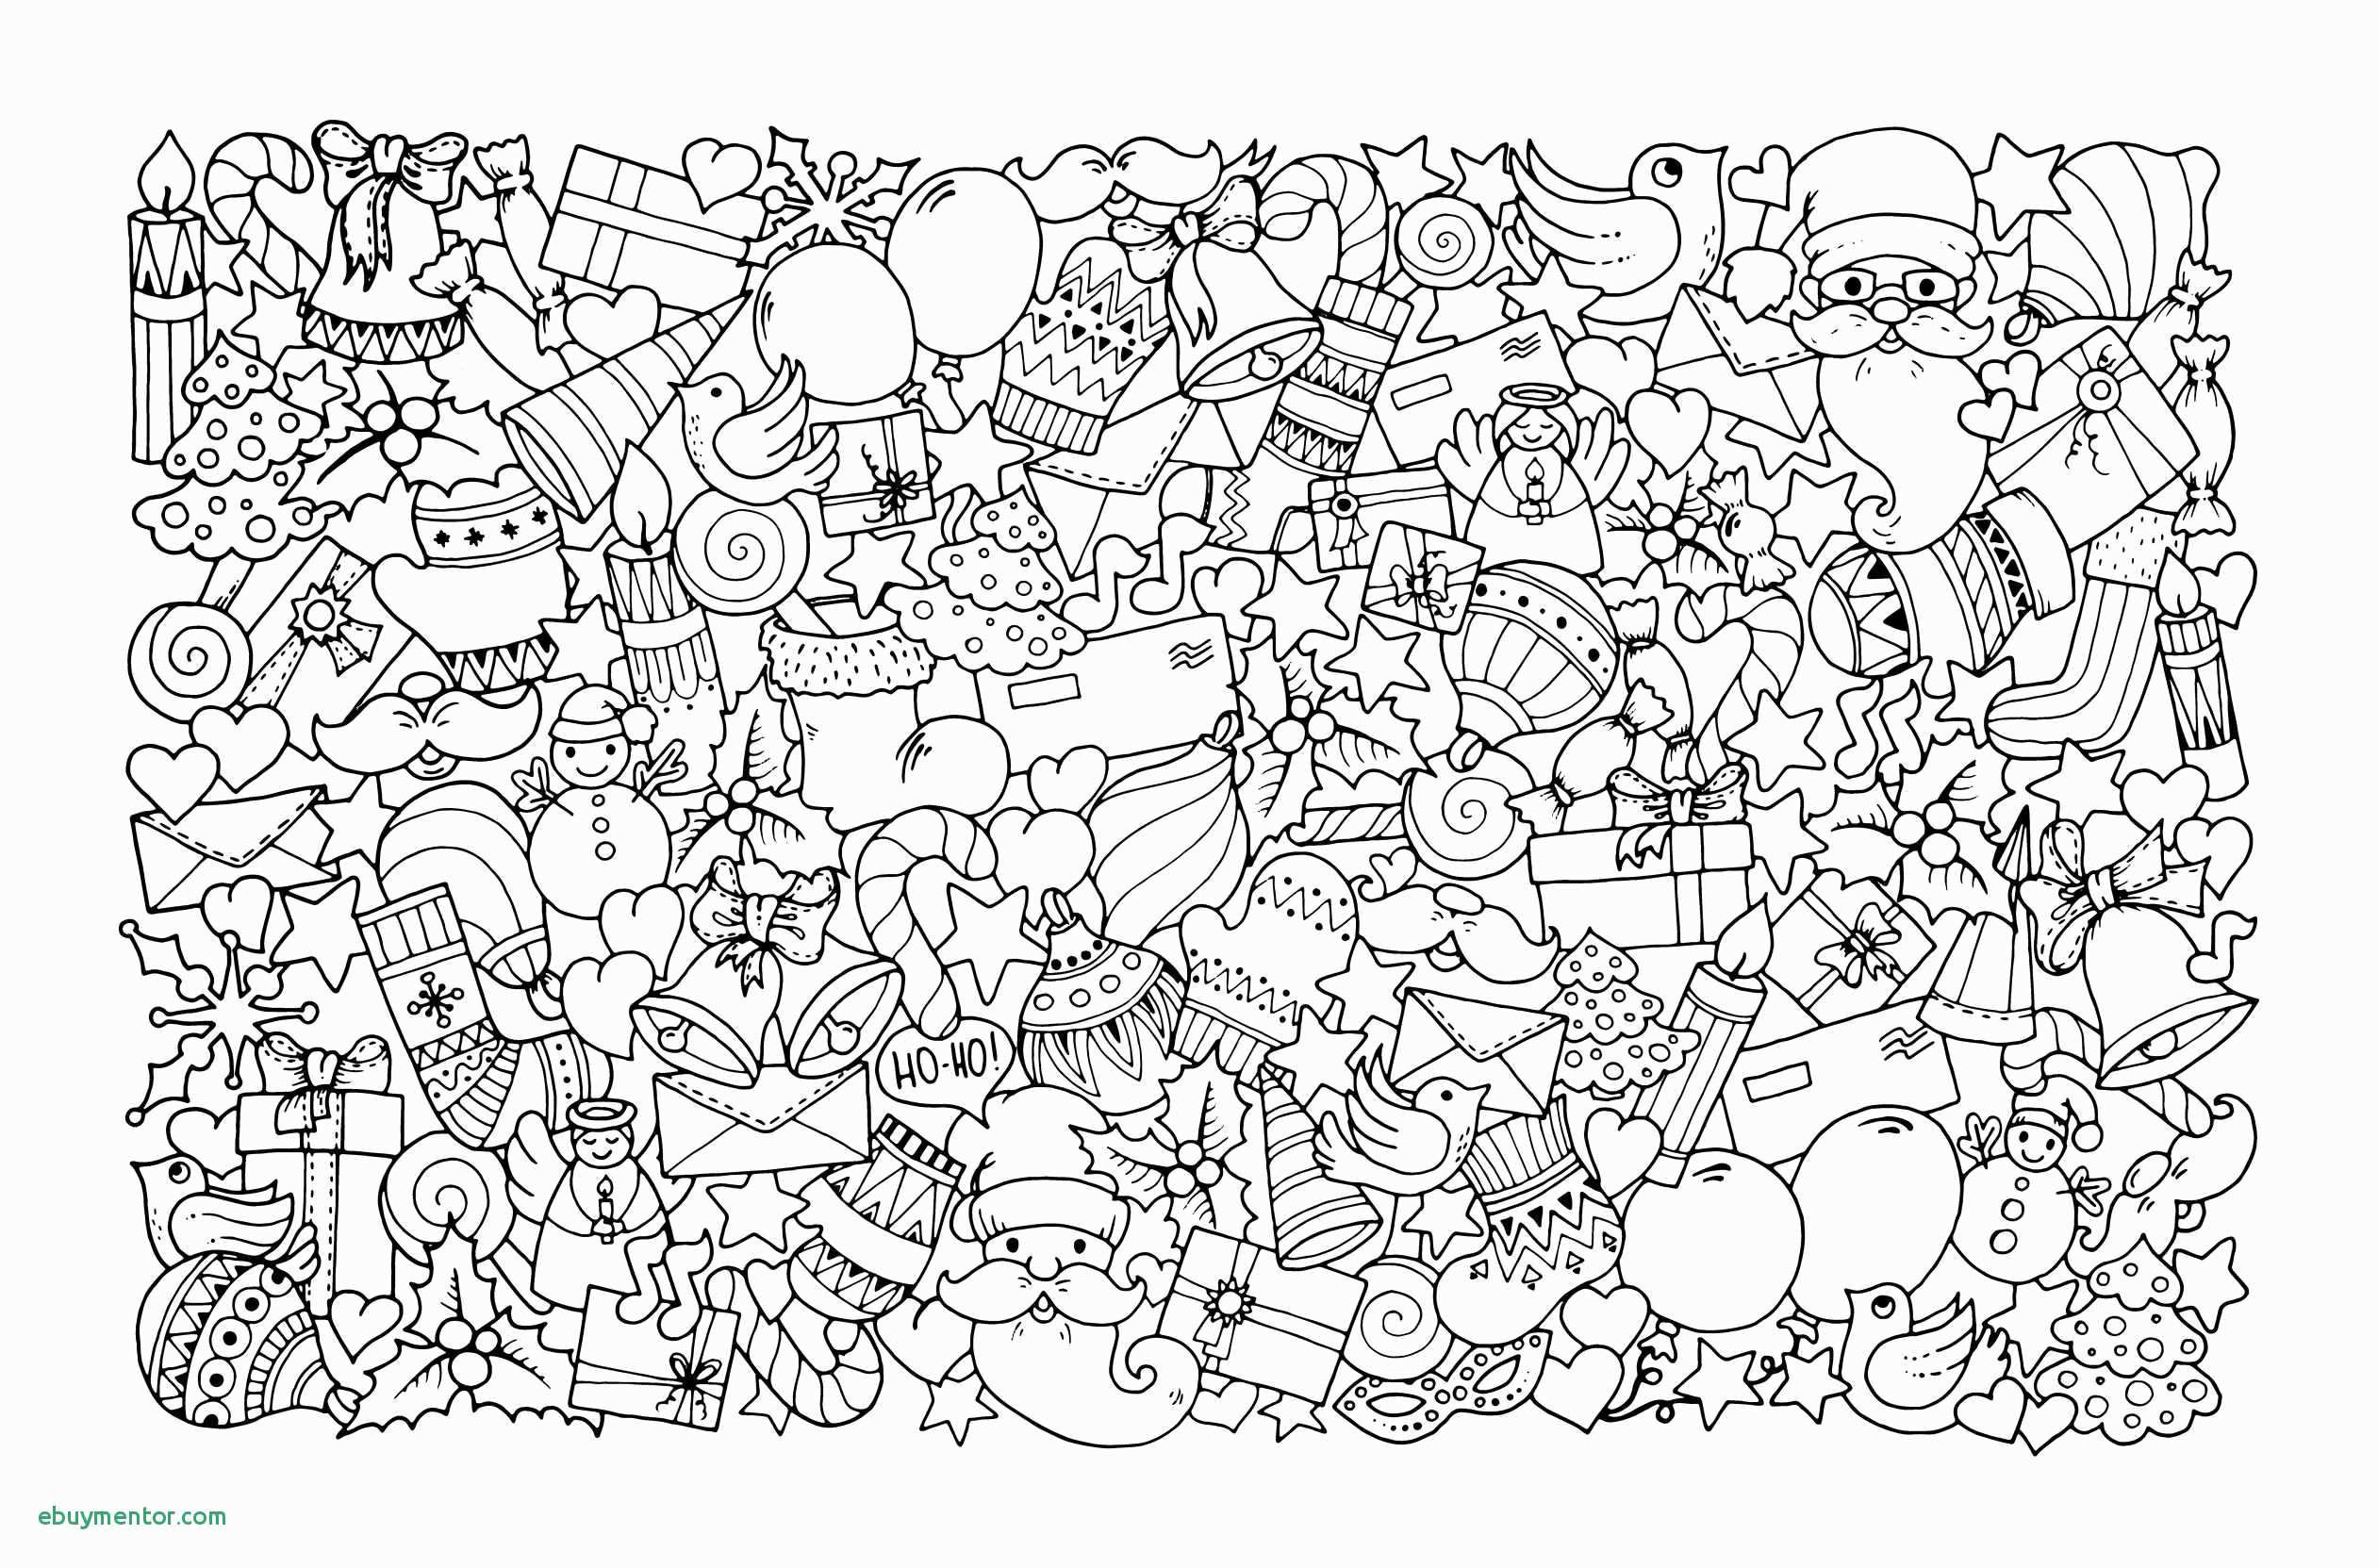 Interactive Coloring Pages Coloring Page 376 Interactive Coloring Pages For Adults Incredible